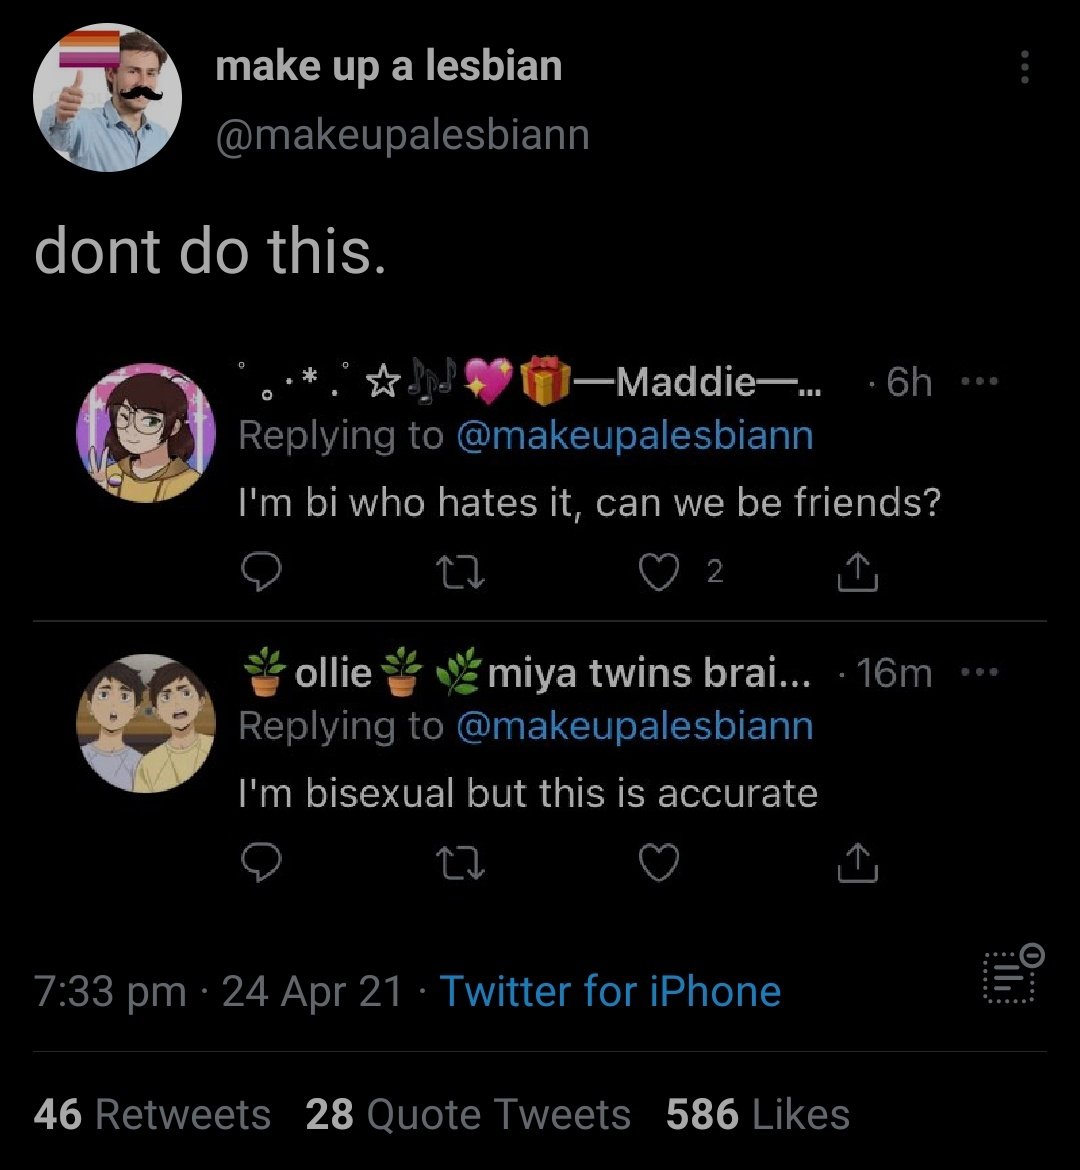 This account is wildly biphobic.  https://twitter.com/makeupalesbiann/status/1386025490155294721